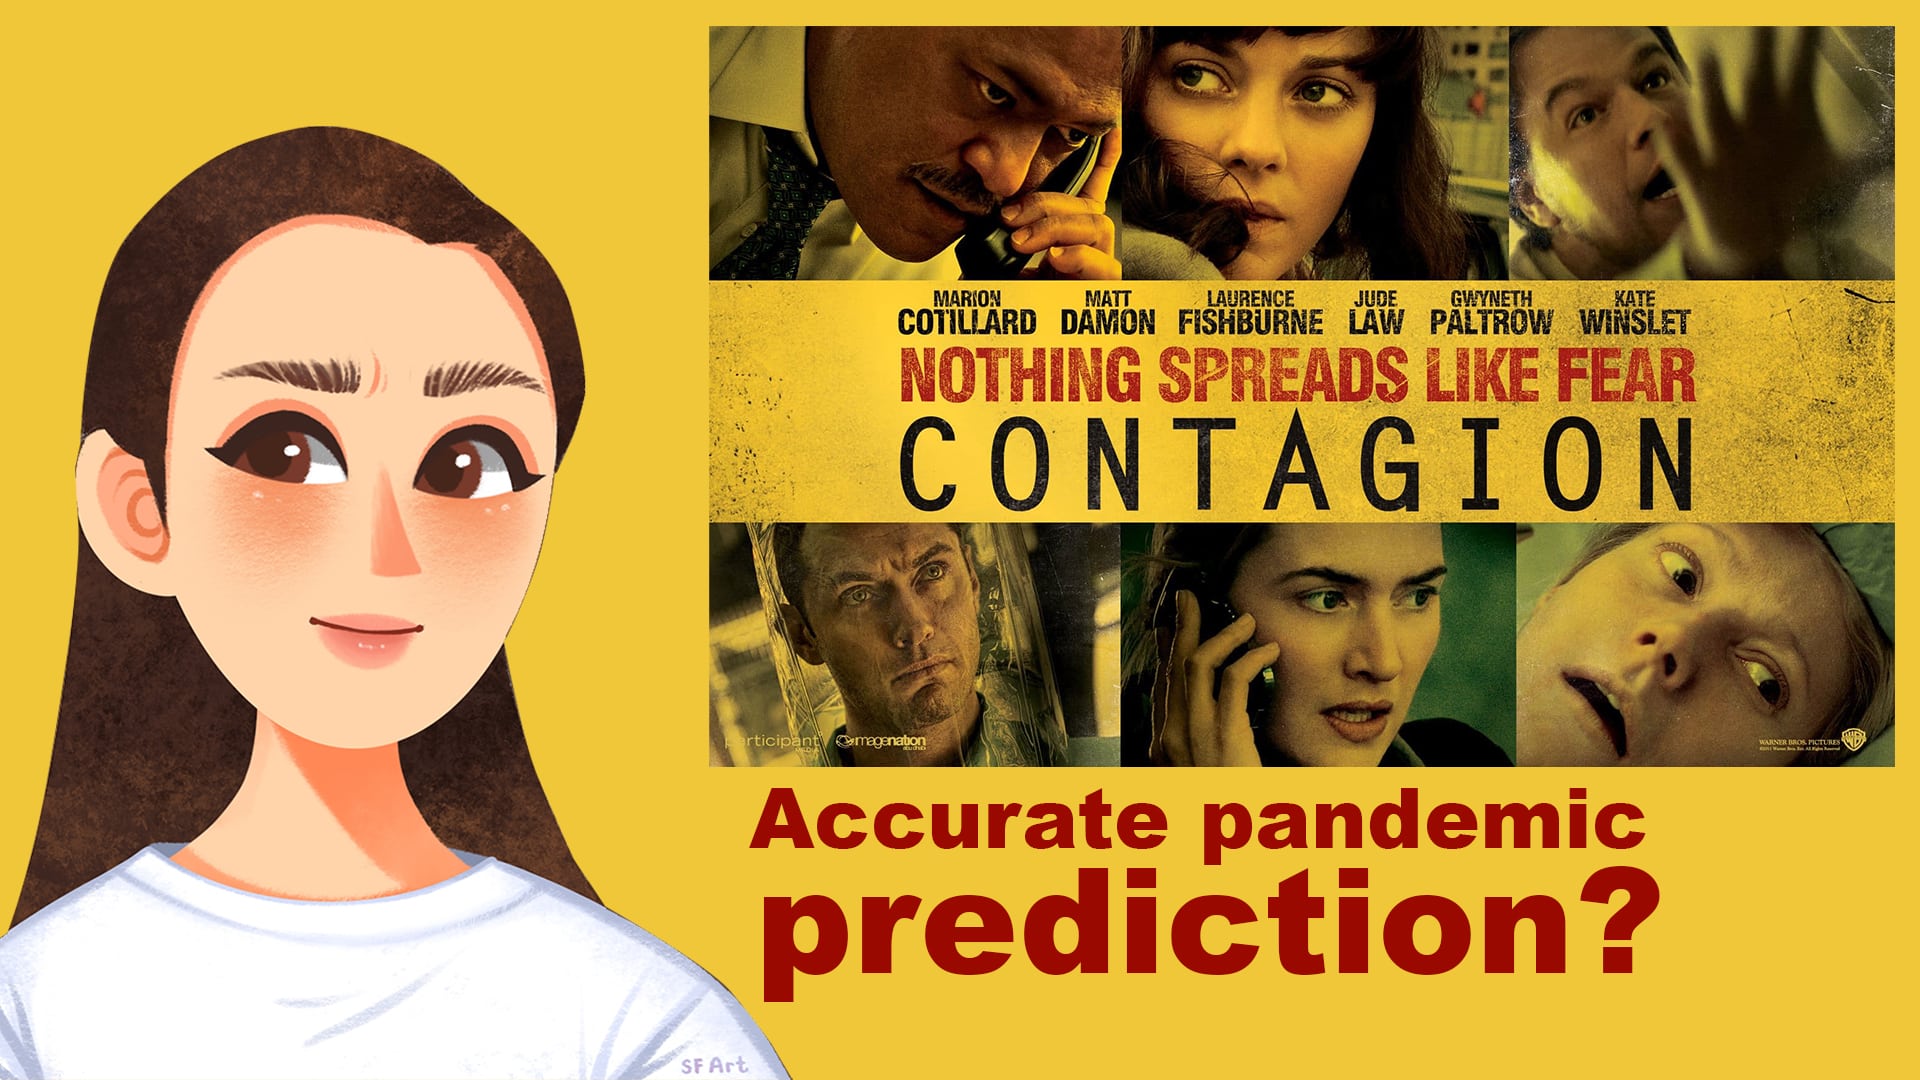 The movie Contagion describes a pandemic. Movie review.